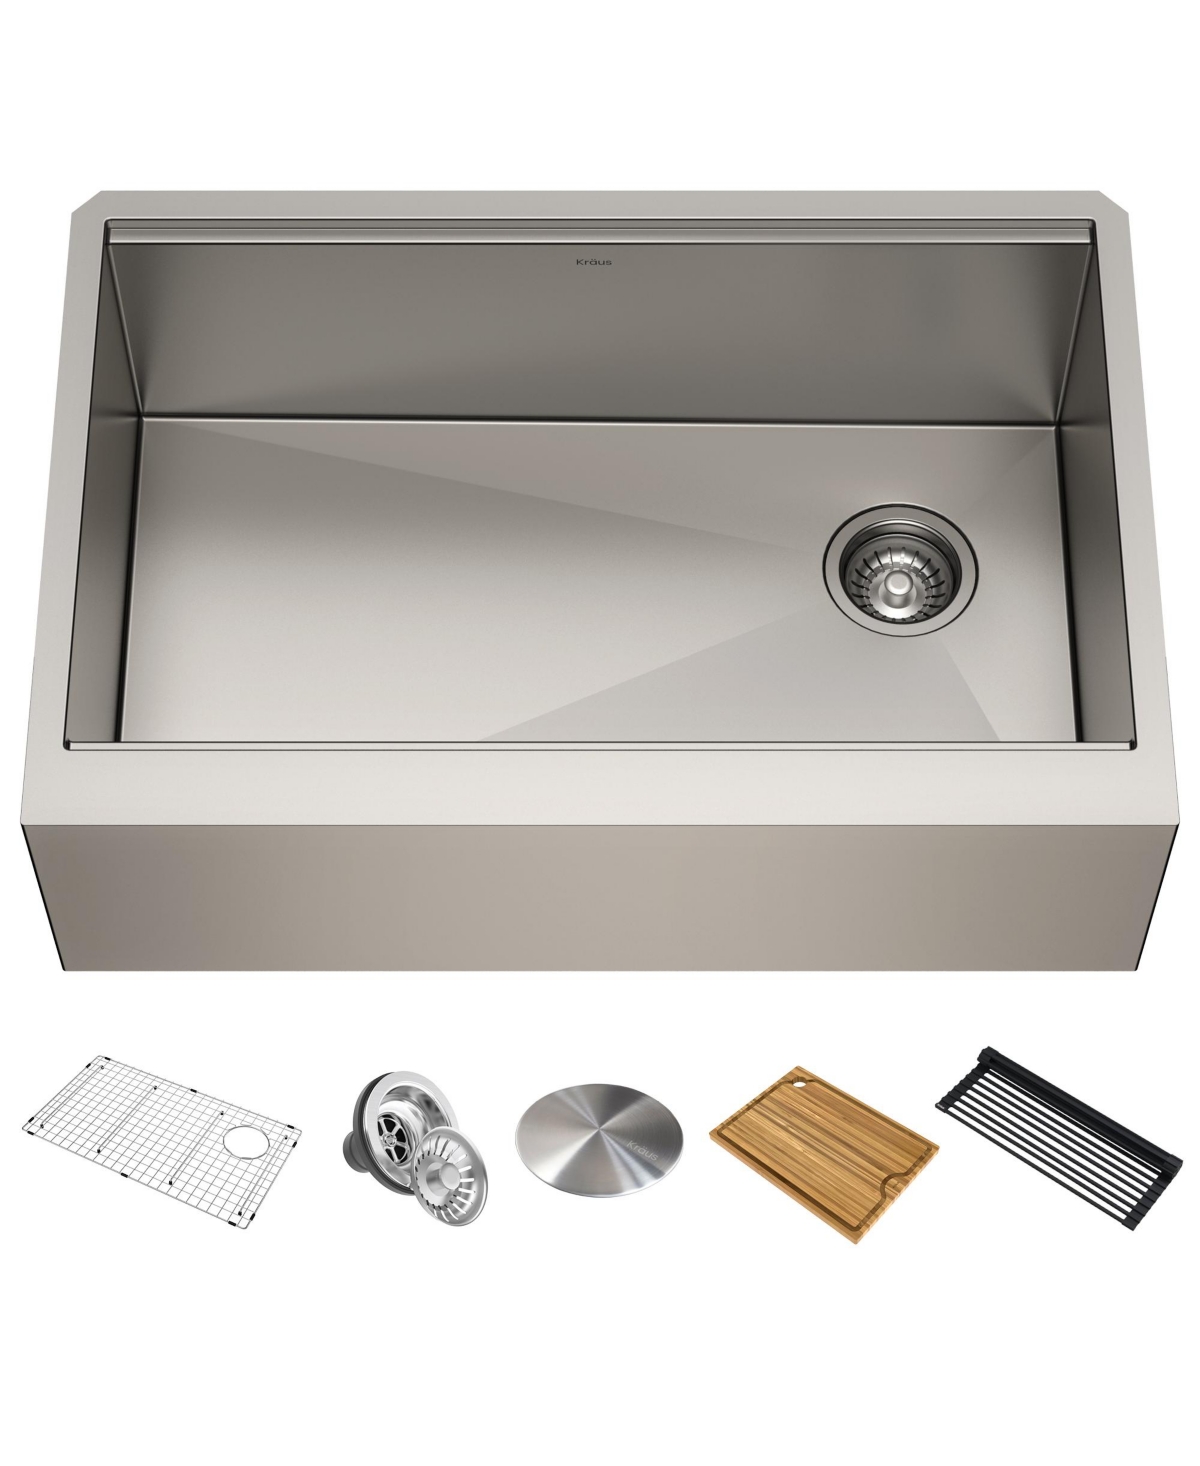 Kore 30 in. Workstation Farmhouse Flat Apron Front 16 Gauge Single Bowl Stainless Steel Kitchen Sink with Accessories - Stainless steel